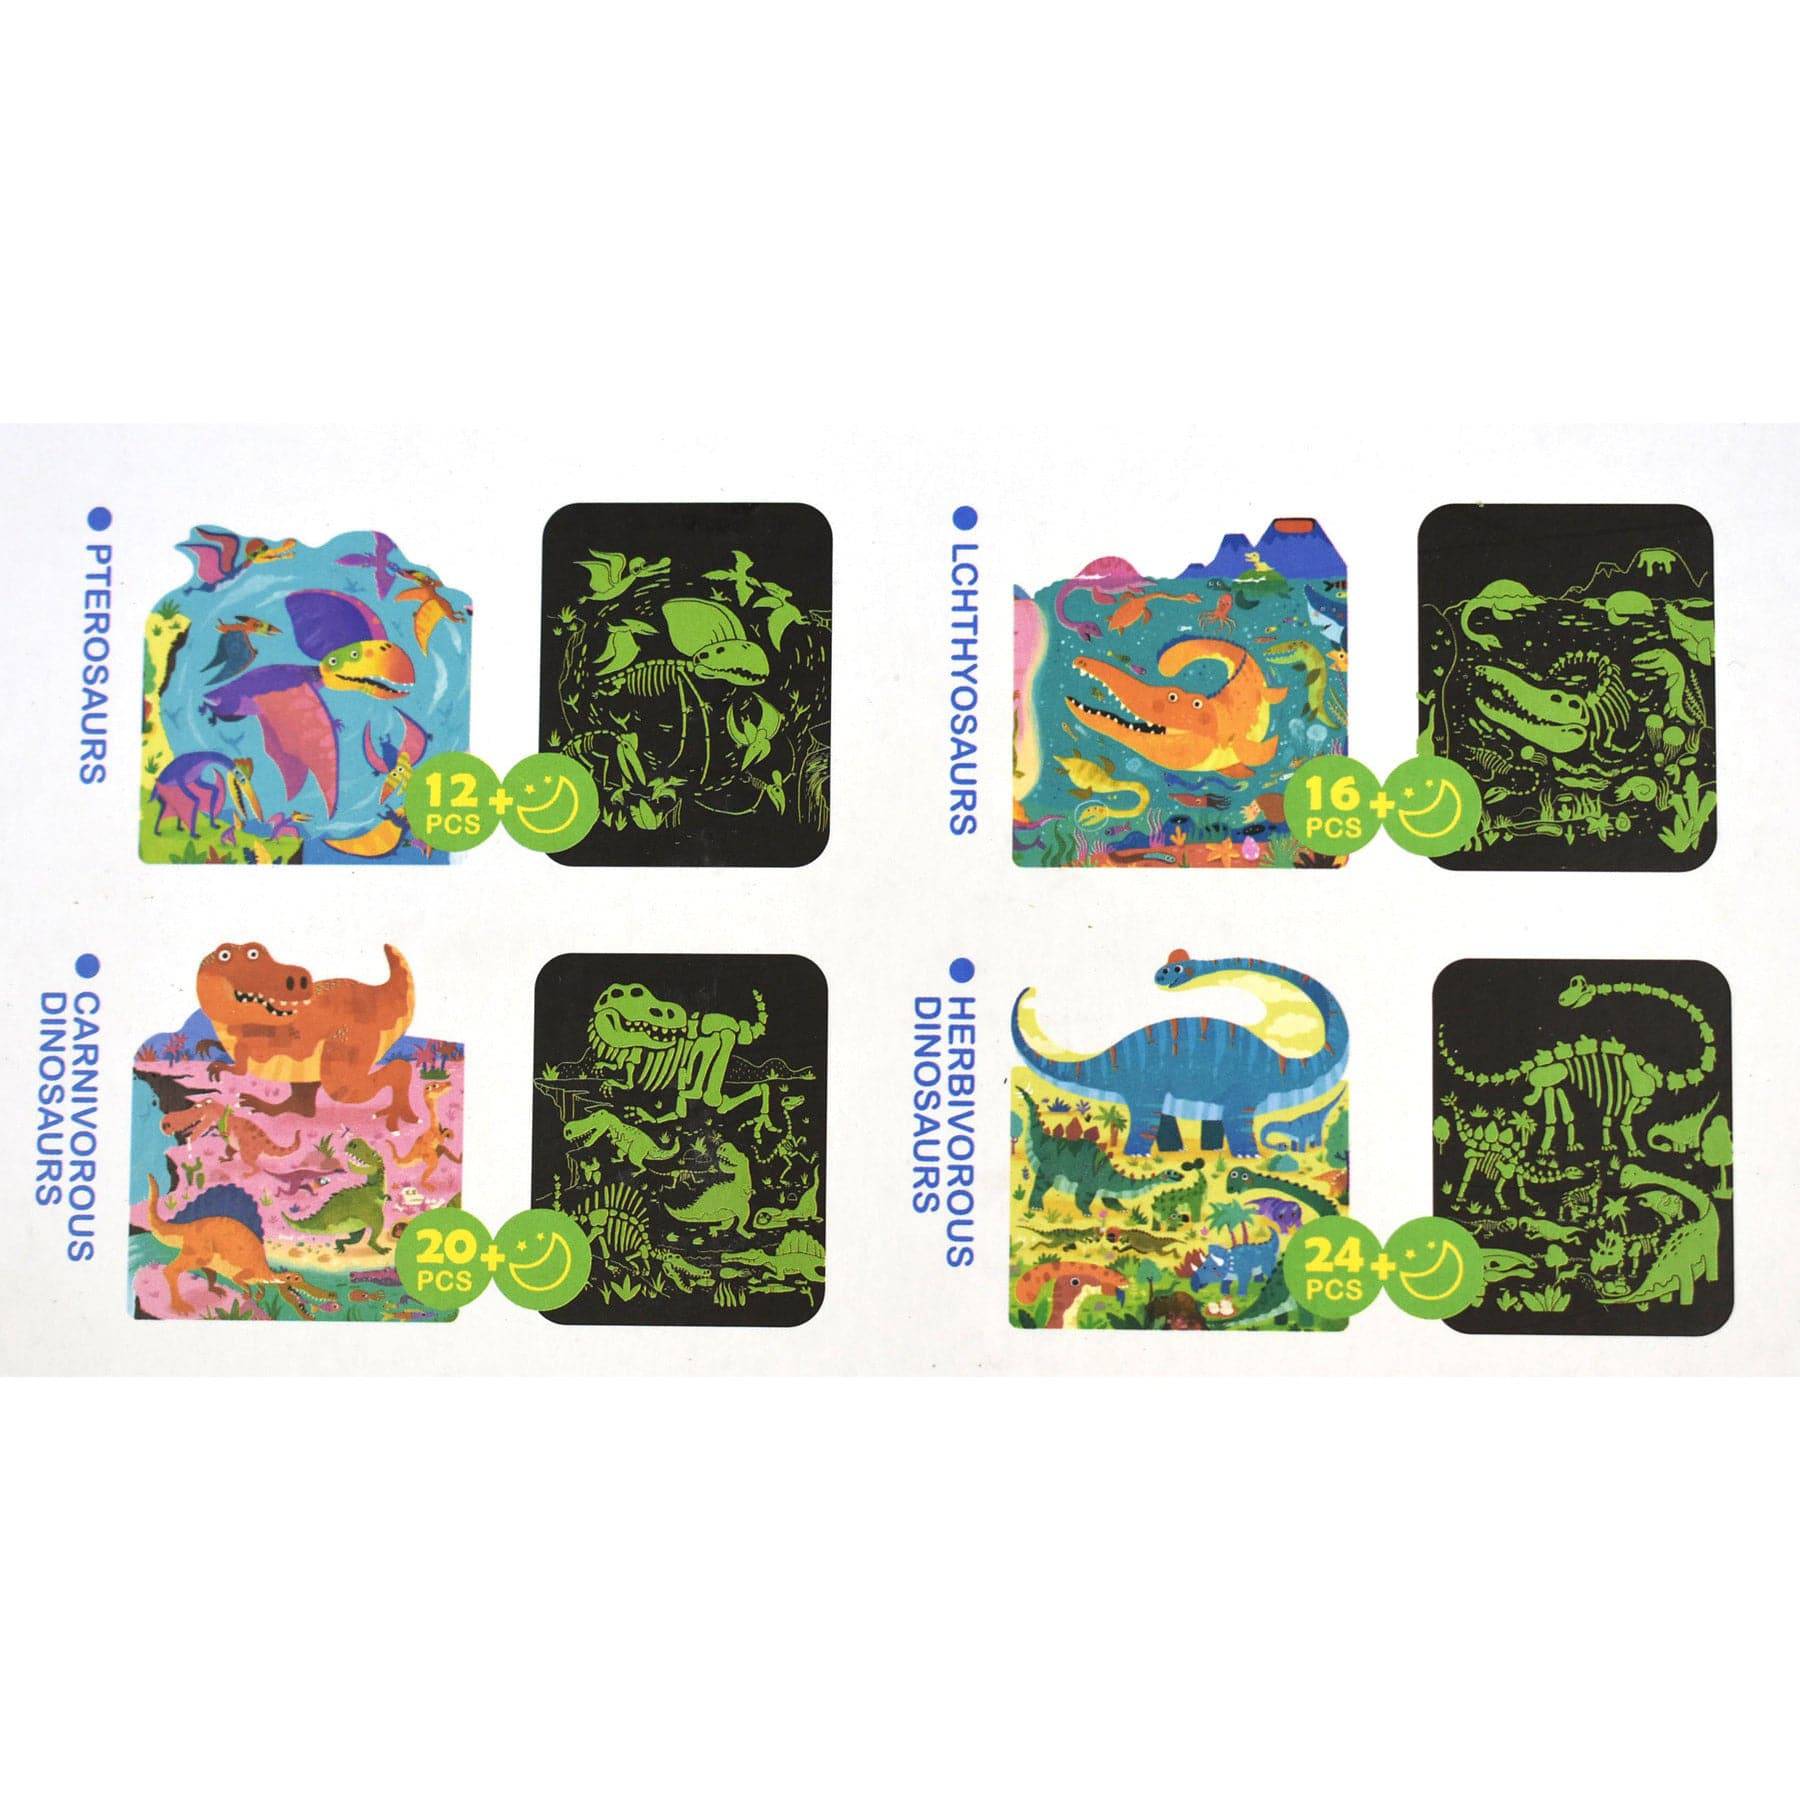 4 in 1 Dinosaurs Glow In The Dark Jigsaw Puzzles - Sensory Circle